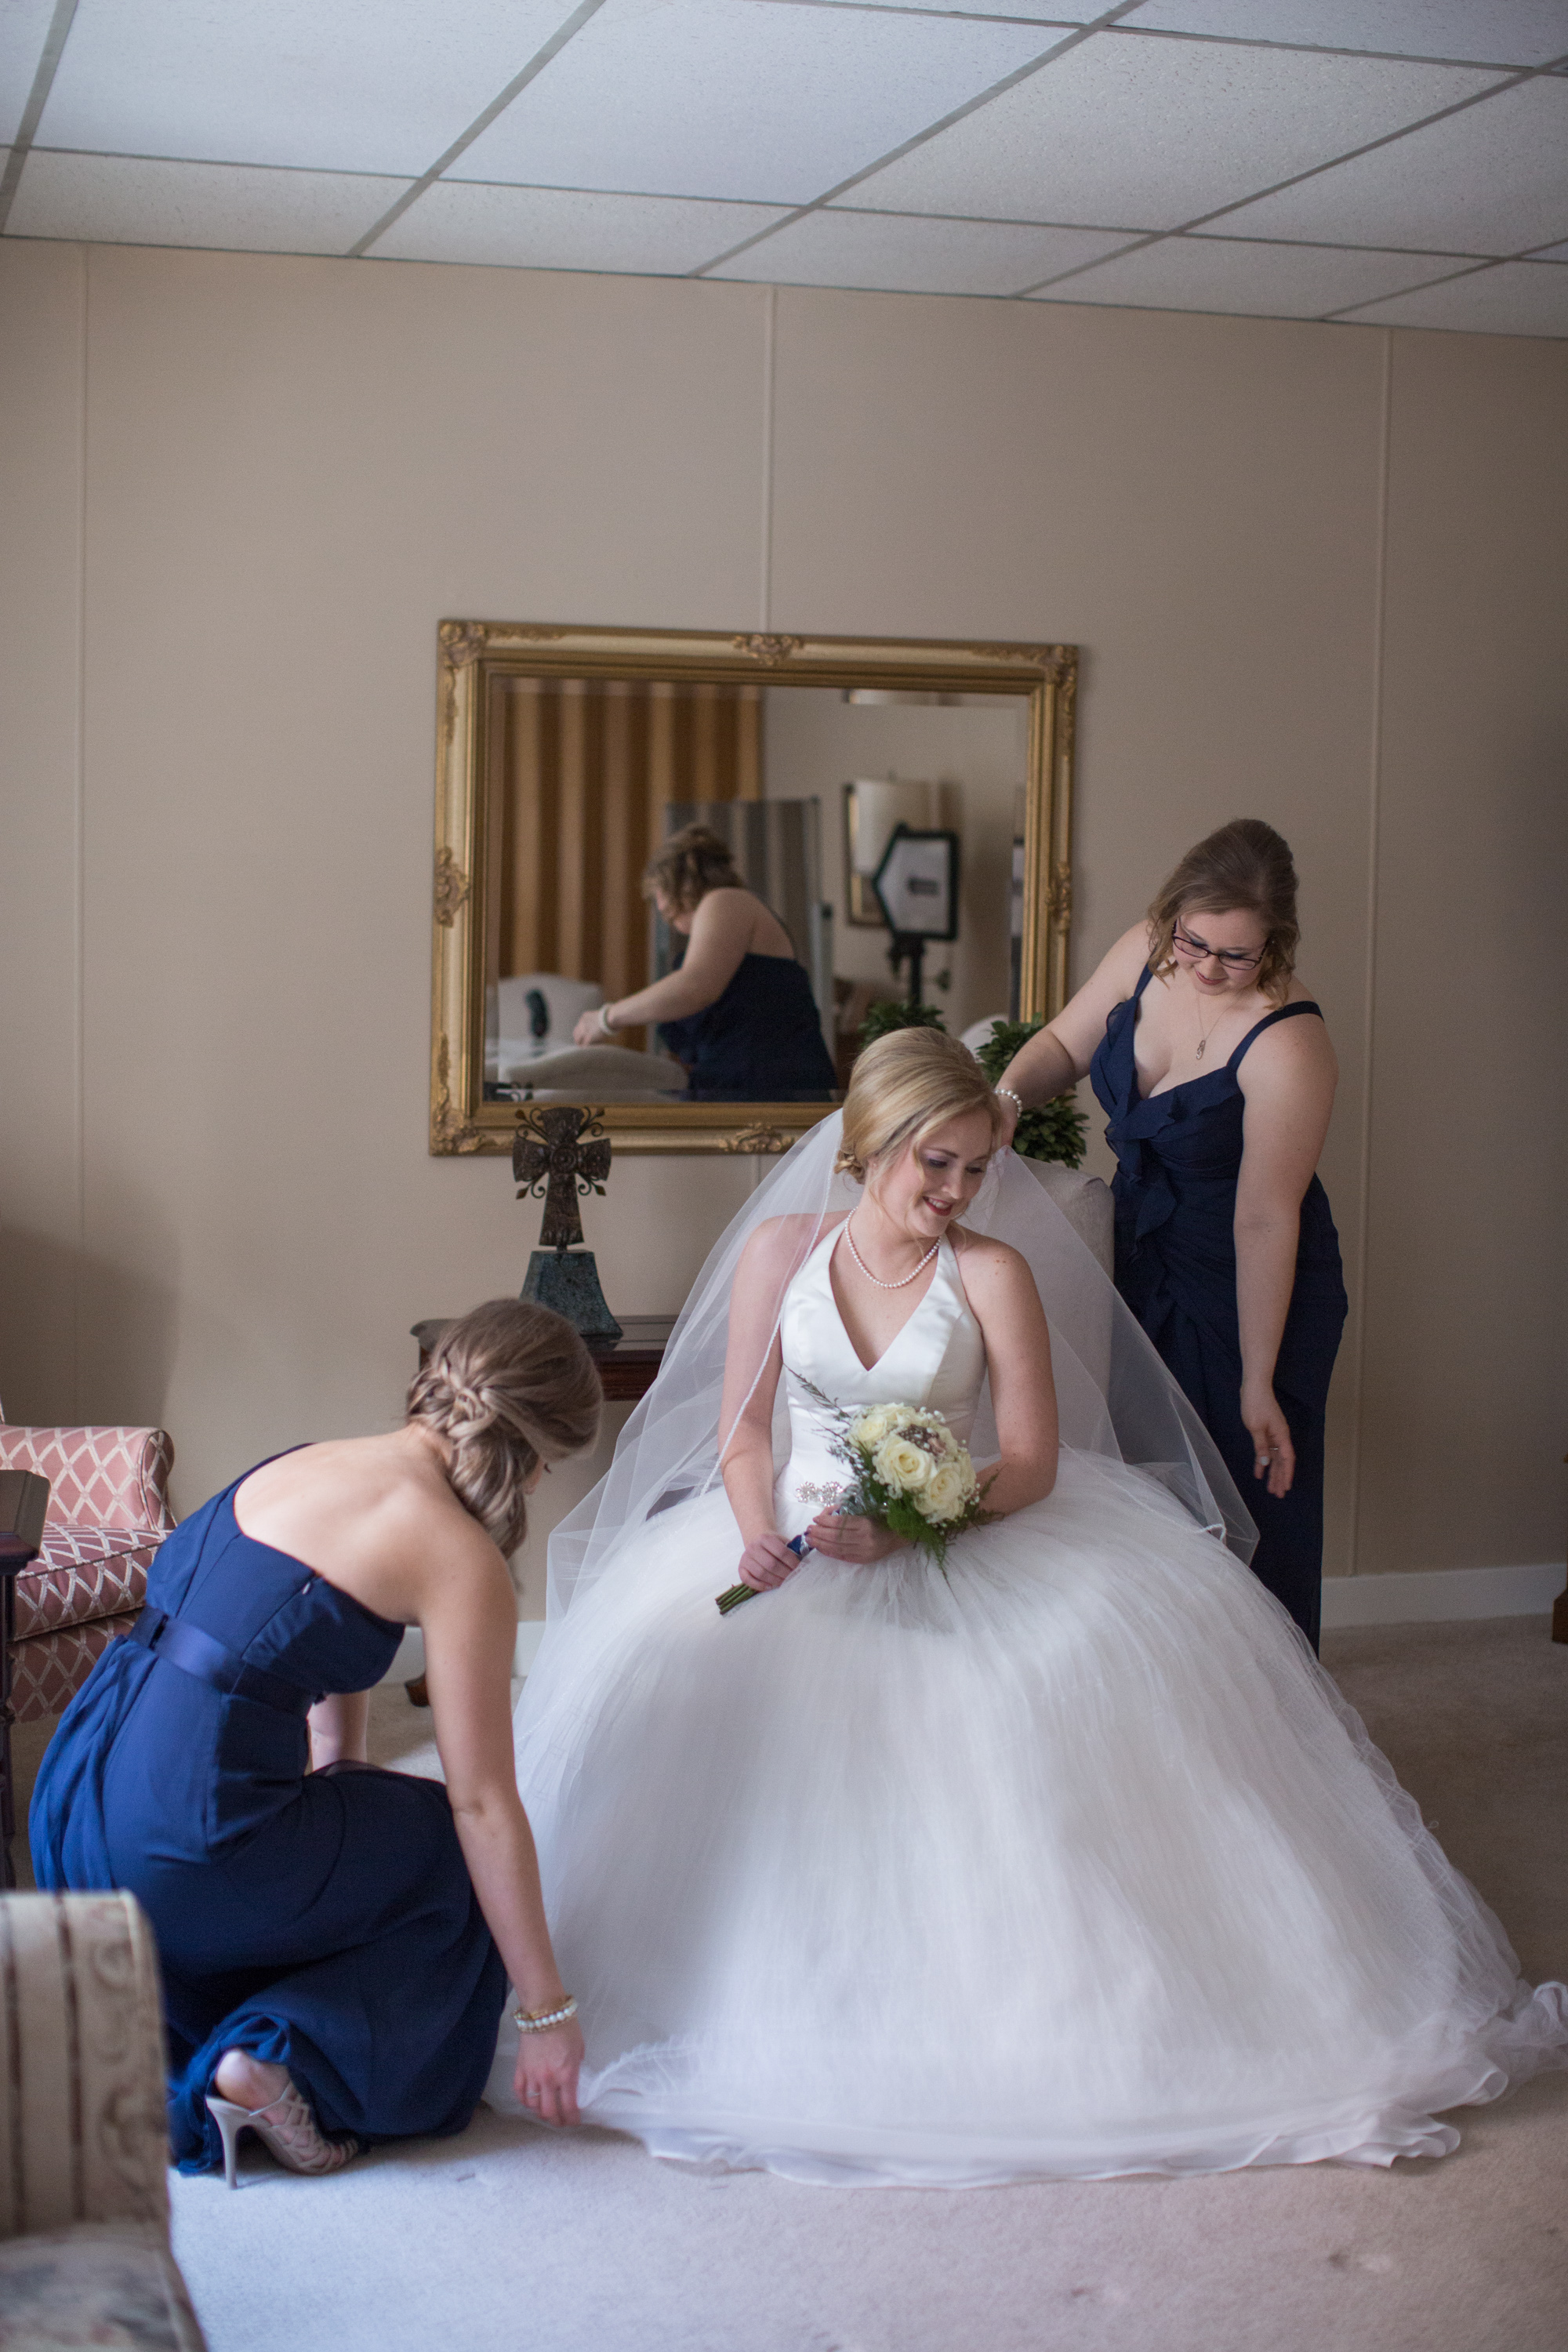  bride-with-bridesmaids-on-wedding-day 